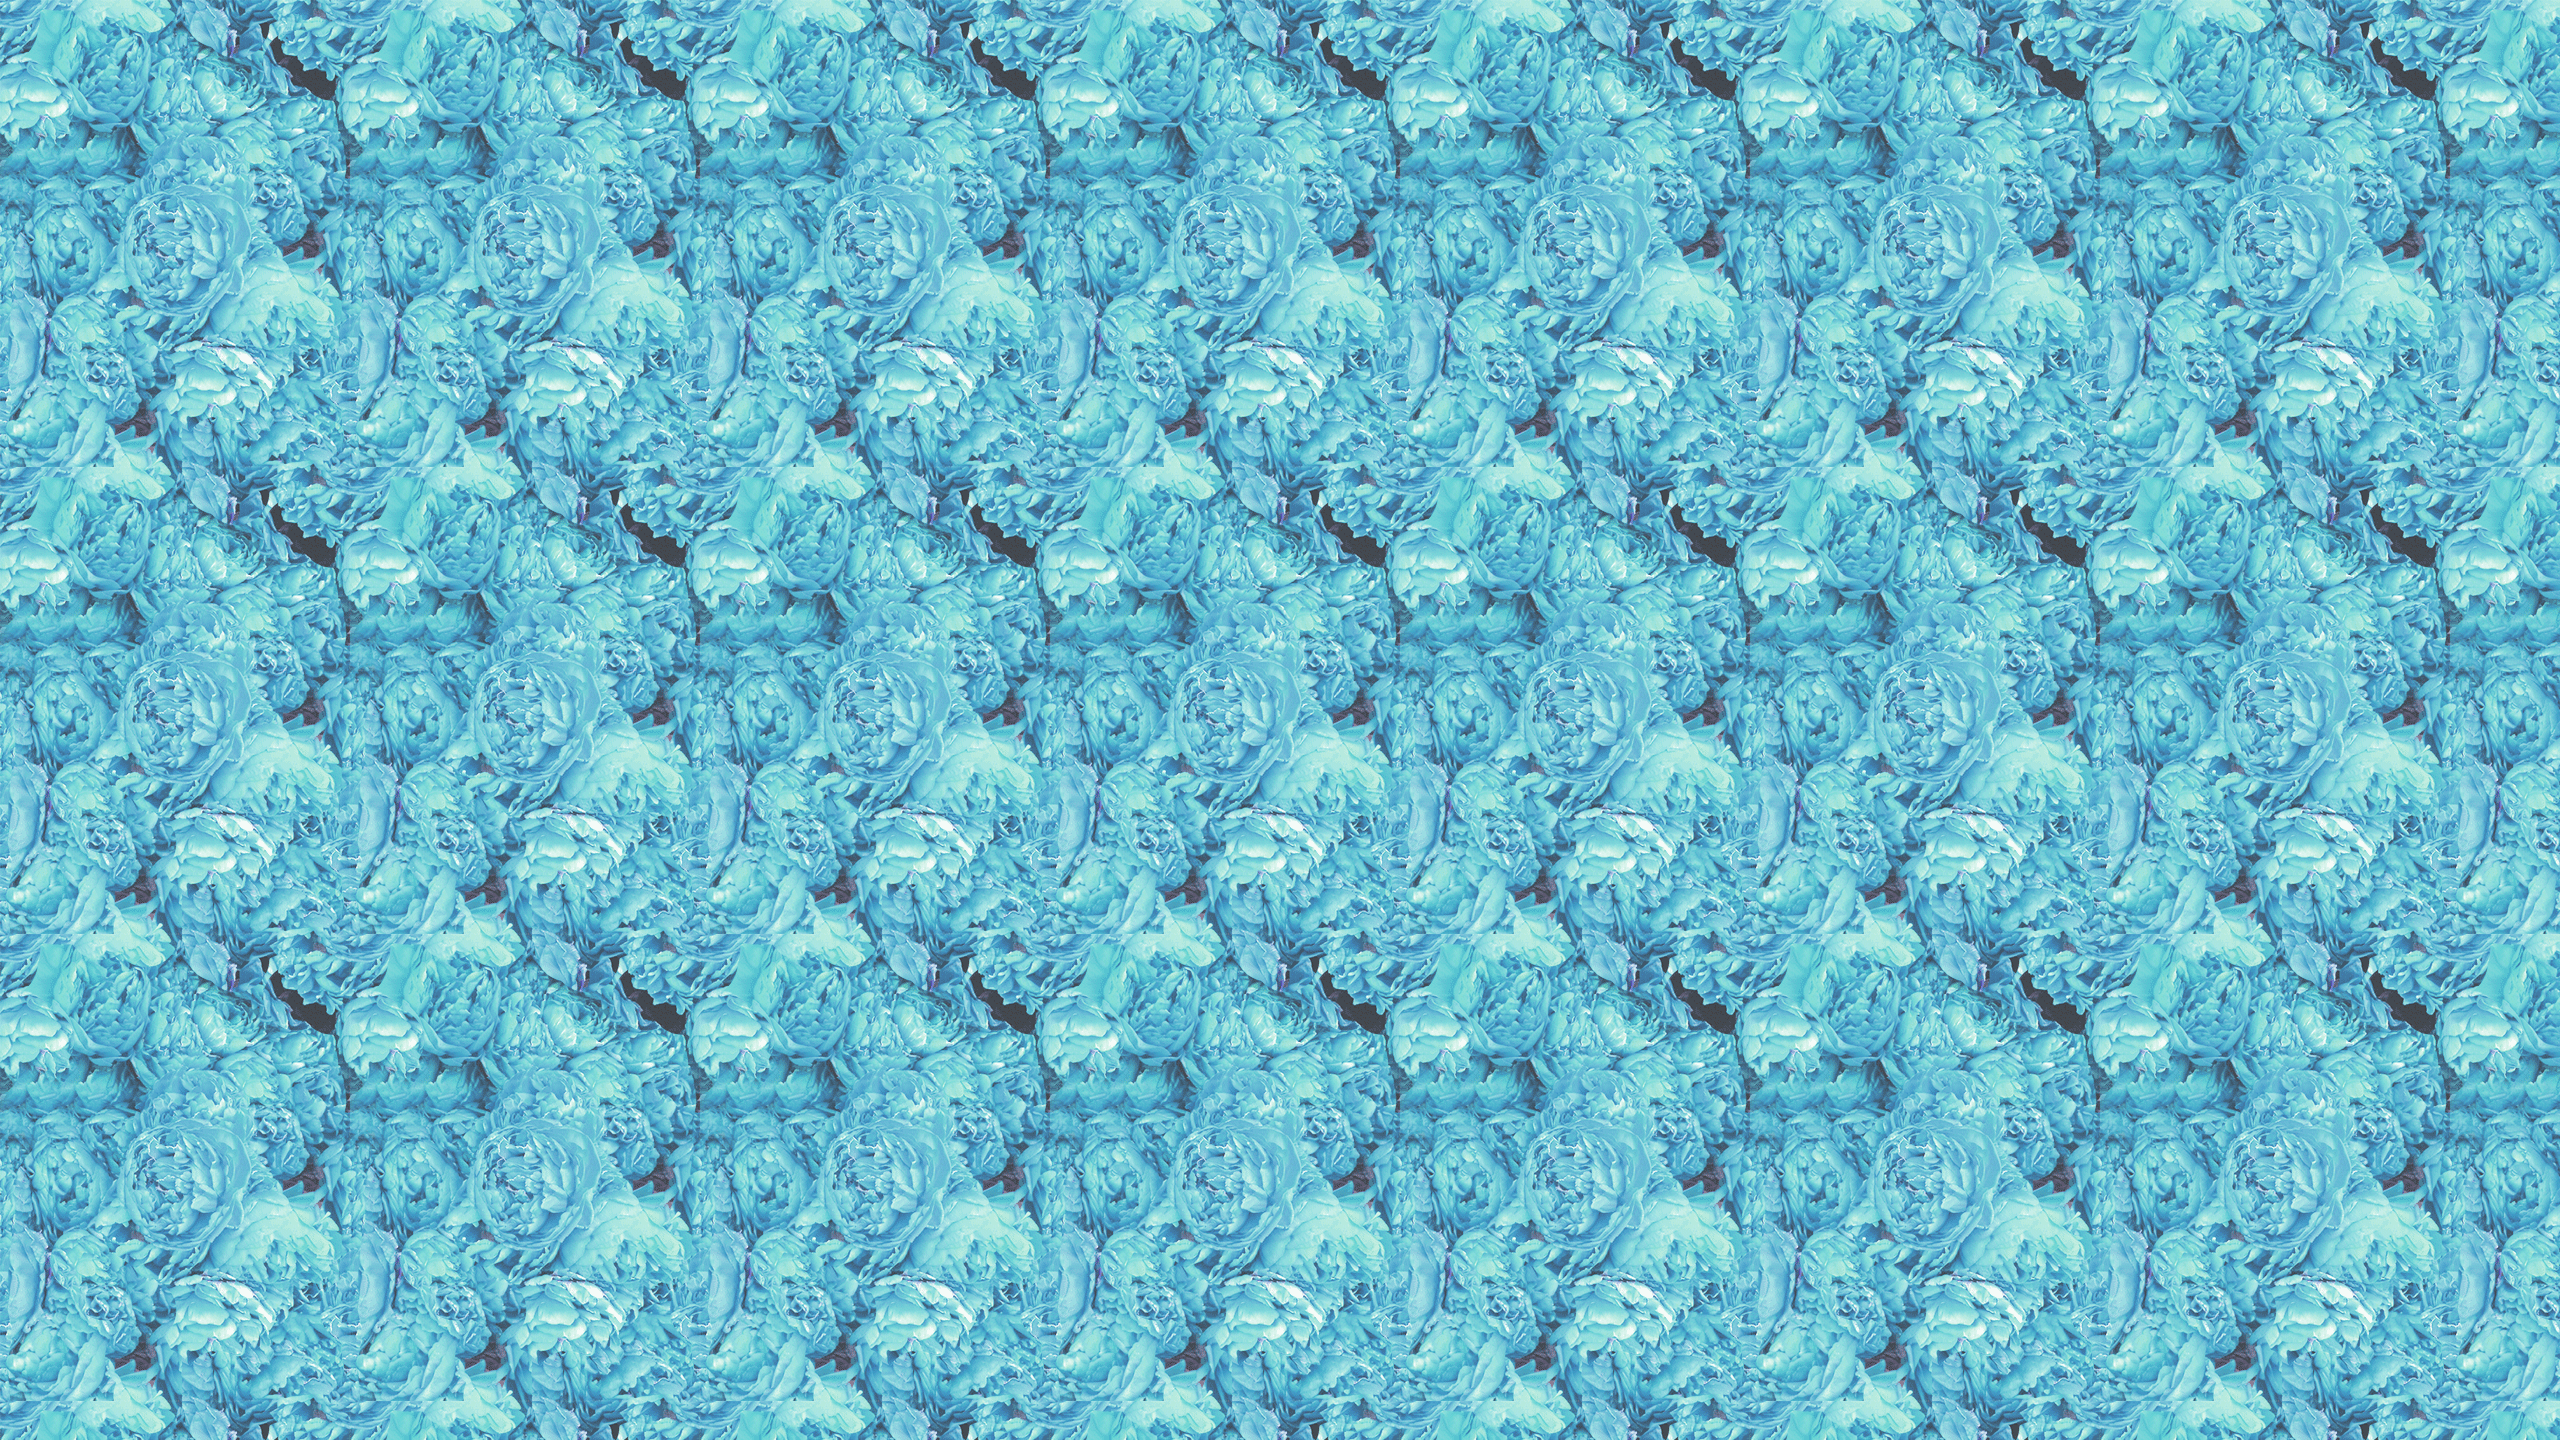 This Blue Hydrangea Desktop Wallpaper Is Easy Just Save The